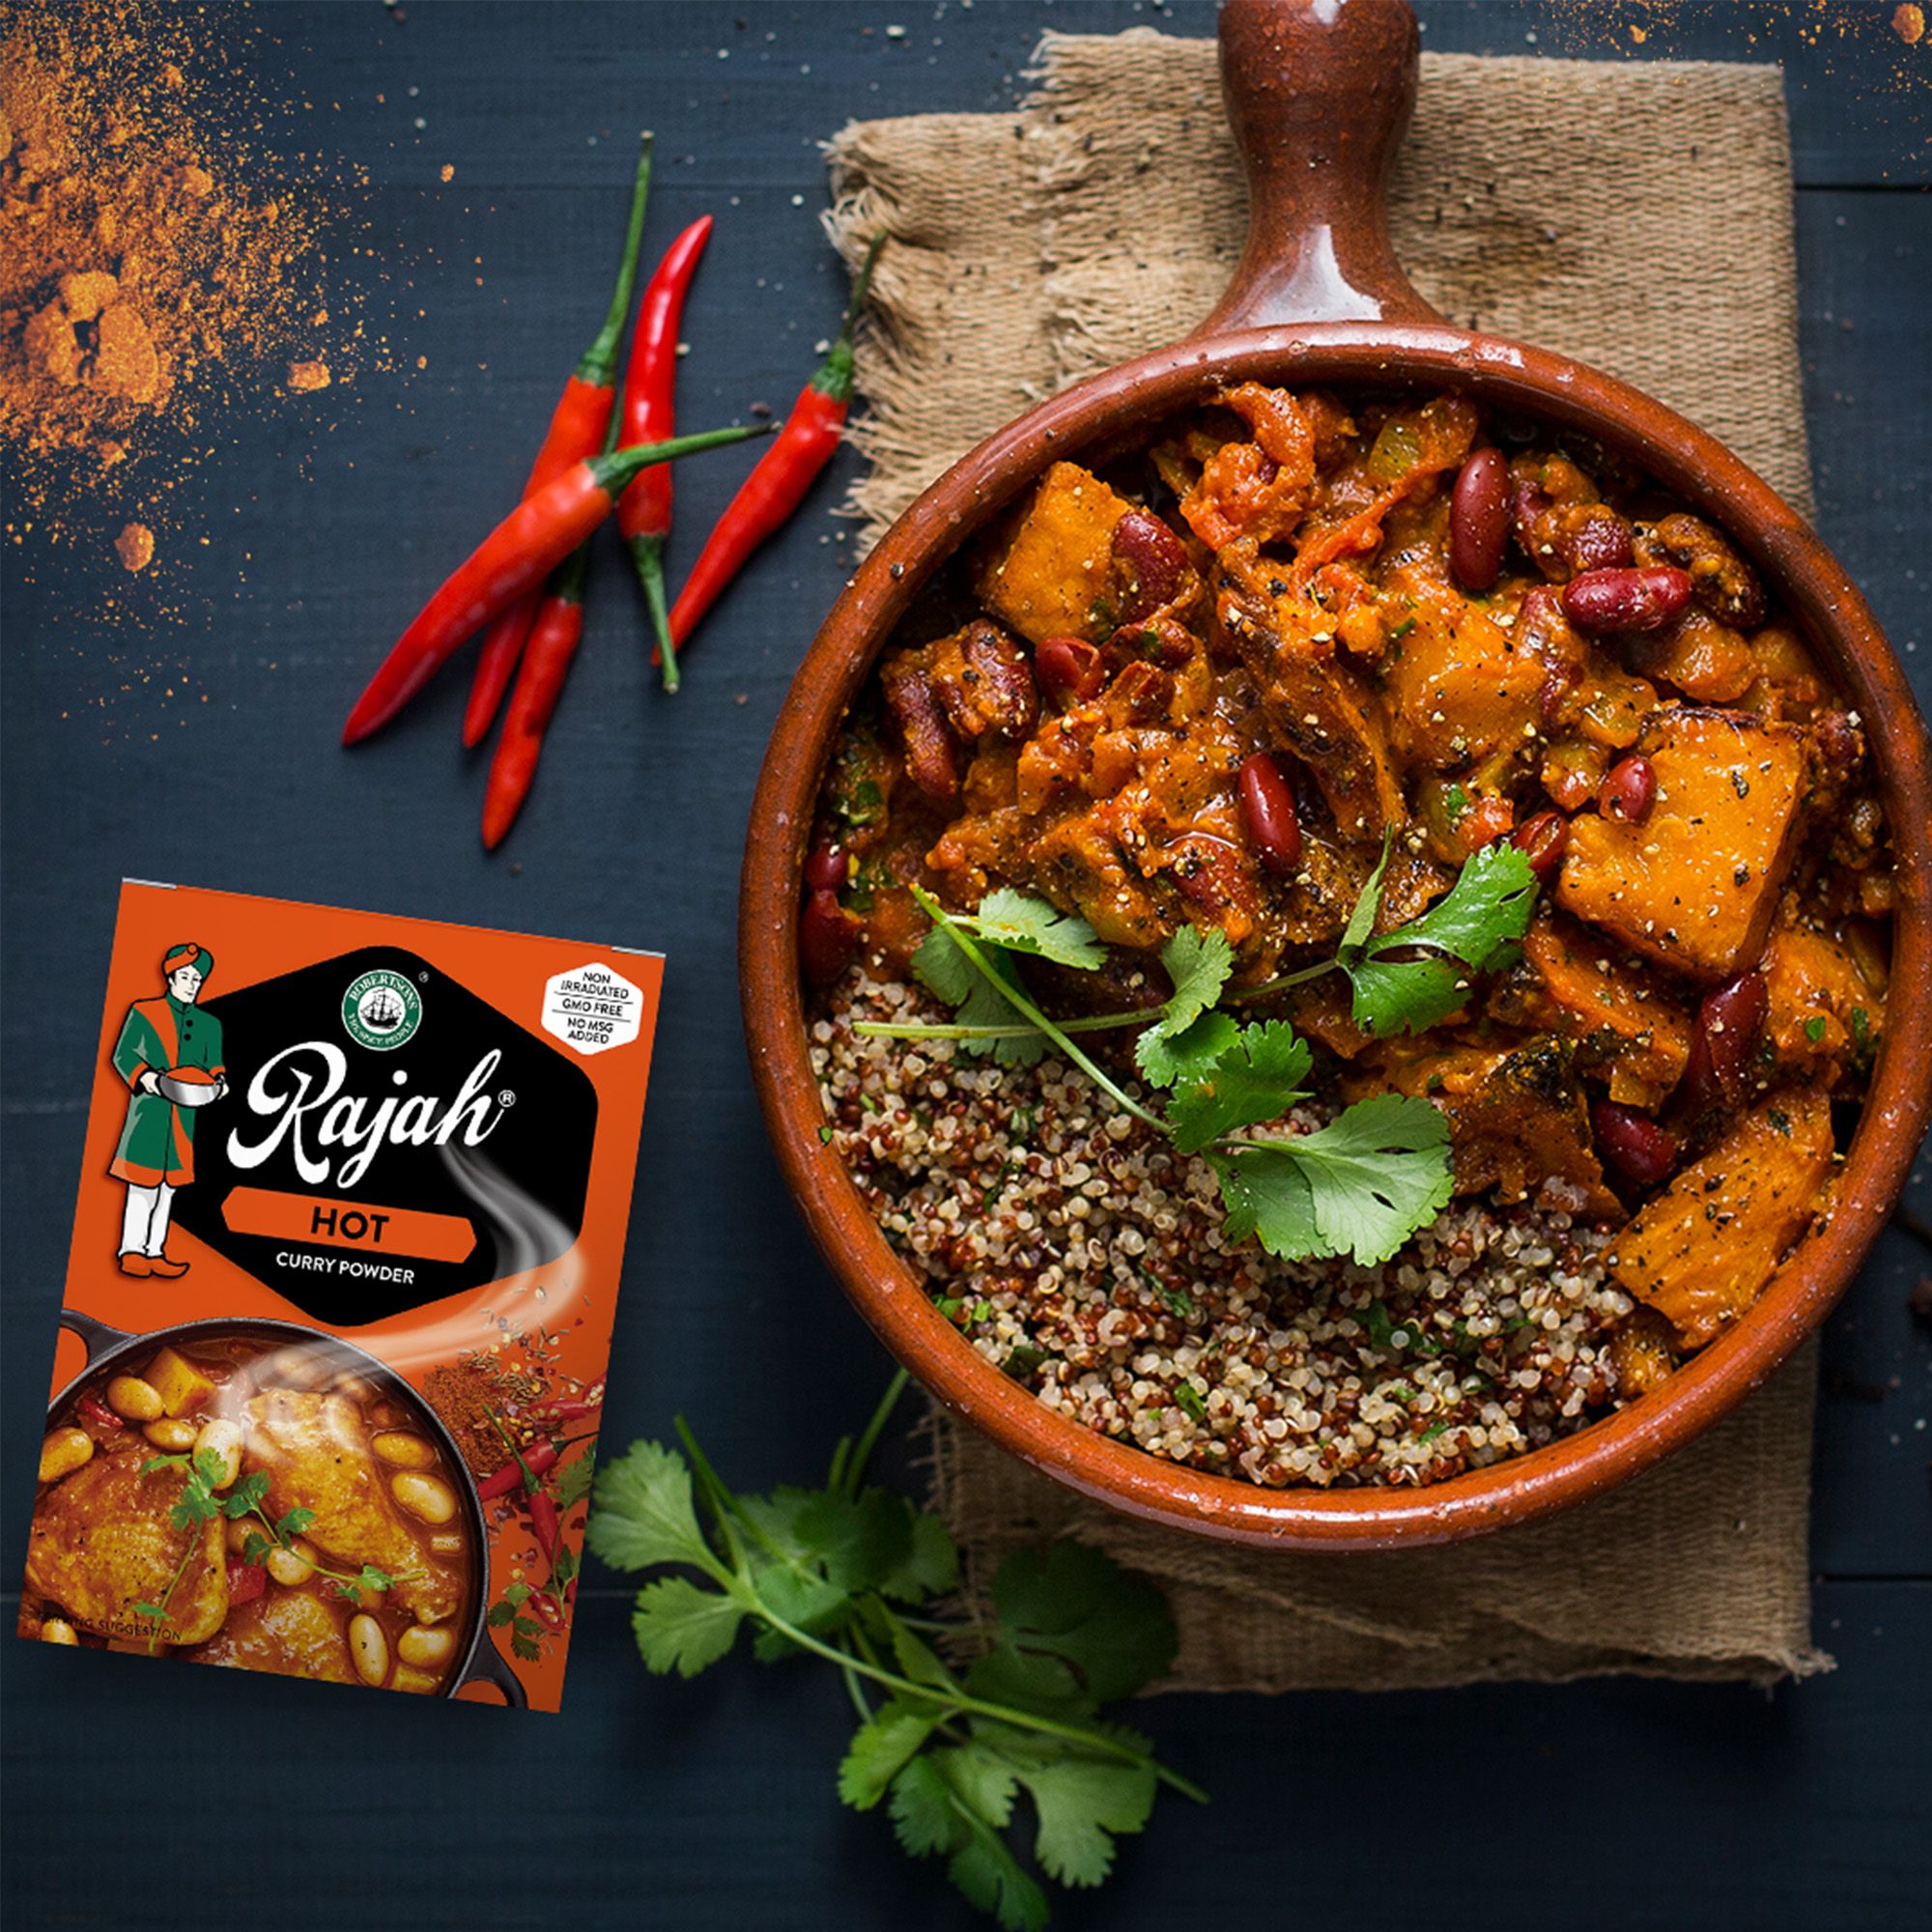 Add zing to your cooking with Rajah spice